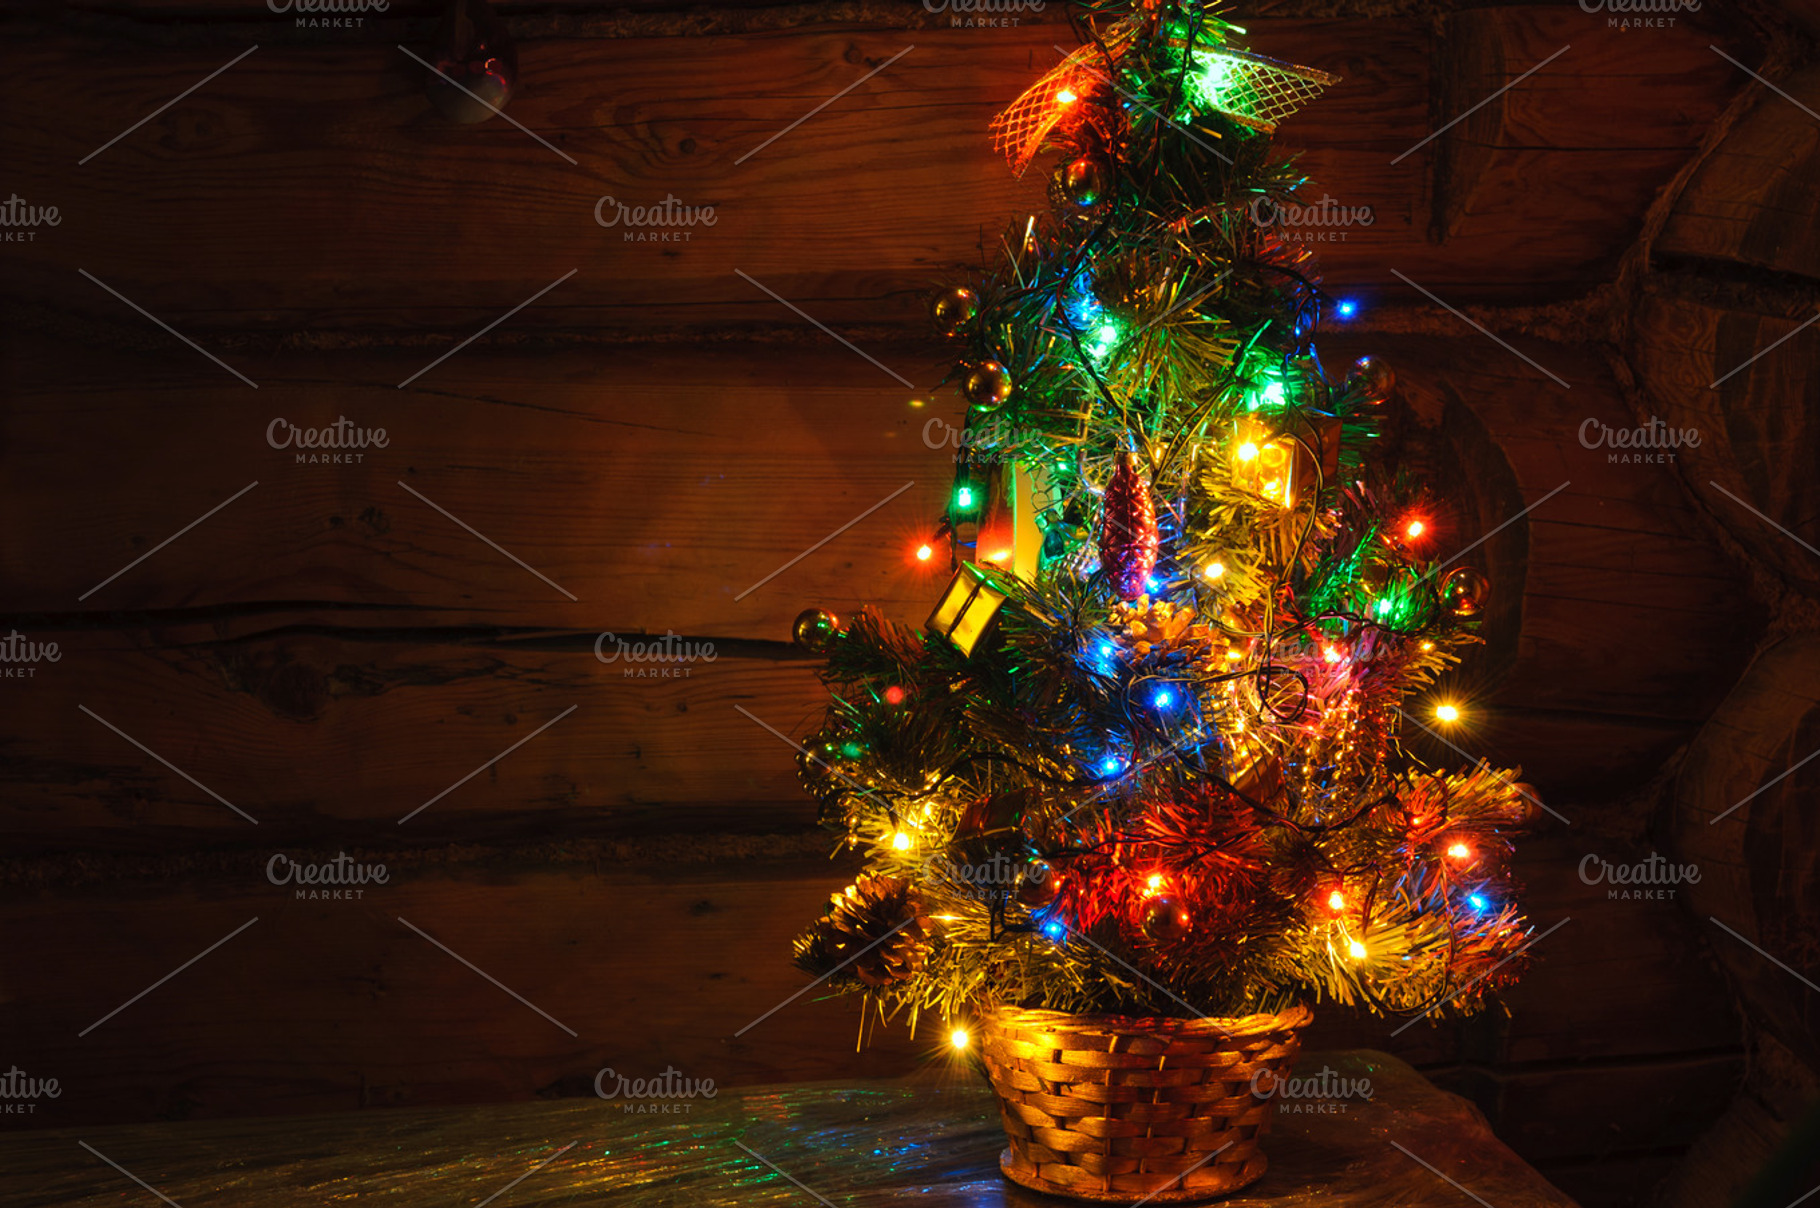 Small Christmas Tree With Multi Colored Lights At Dark Countryside Room